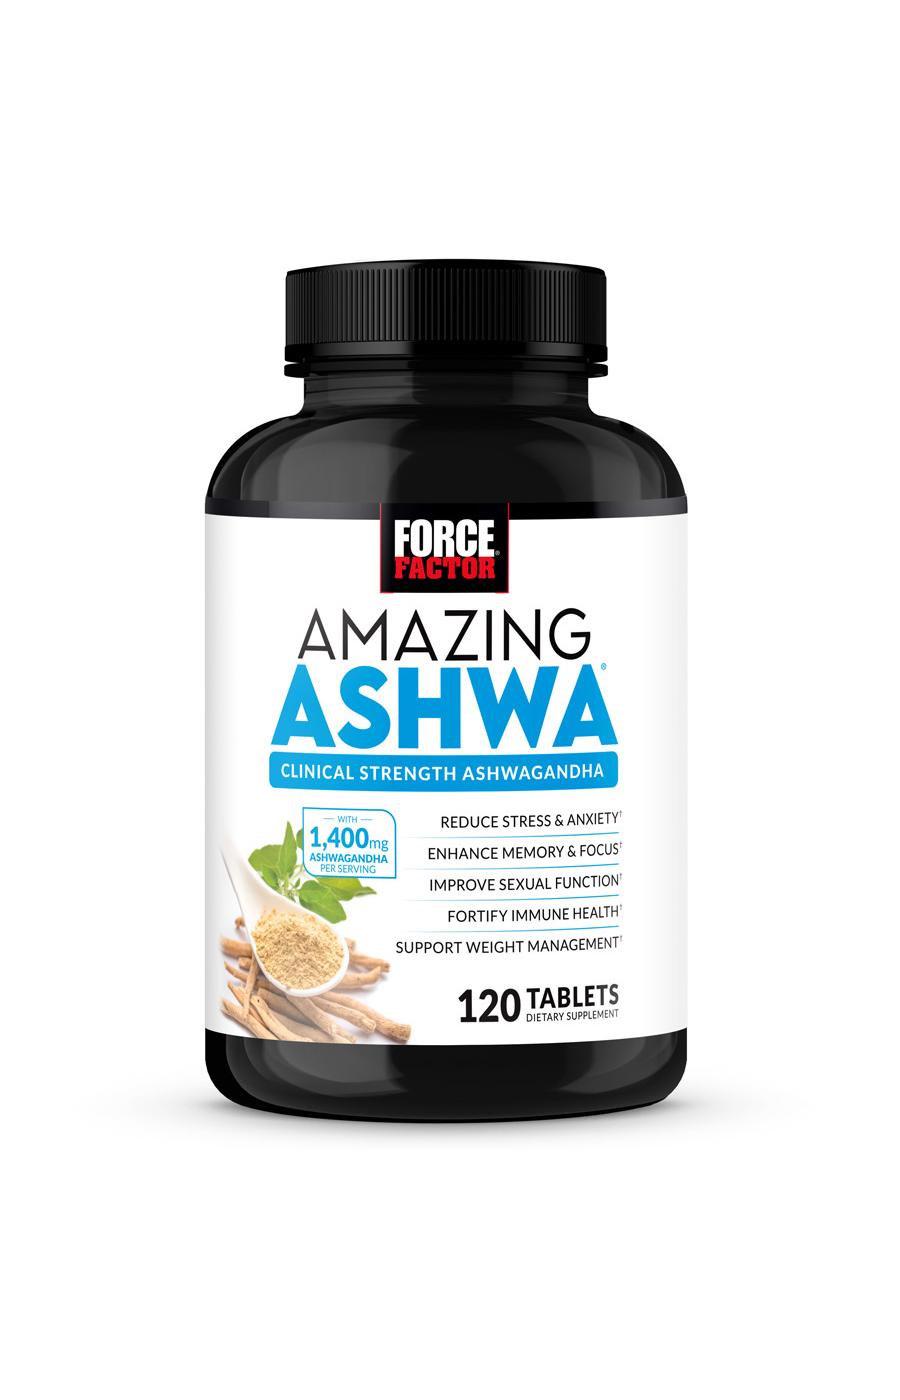 Force Factor Amazing Ashwa Tablets; image 1 of 5